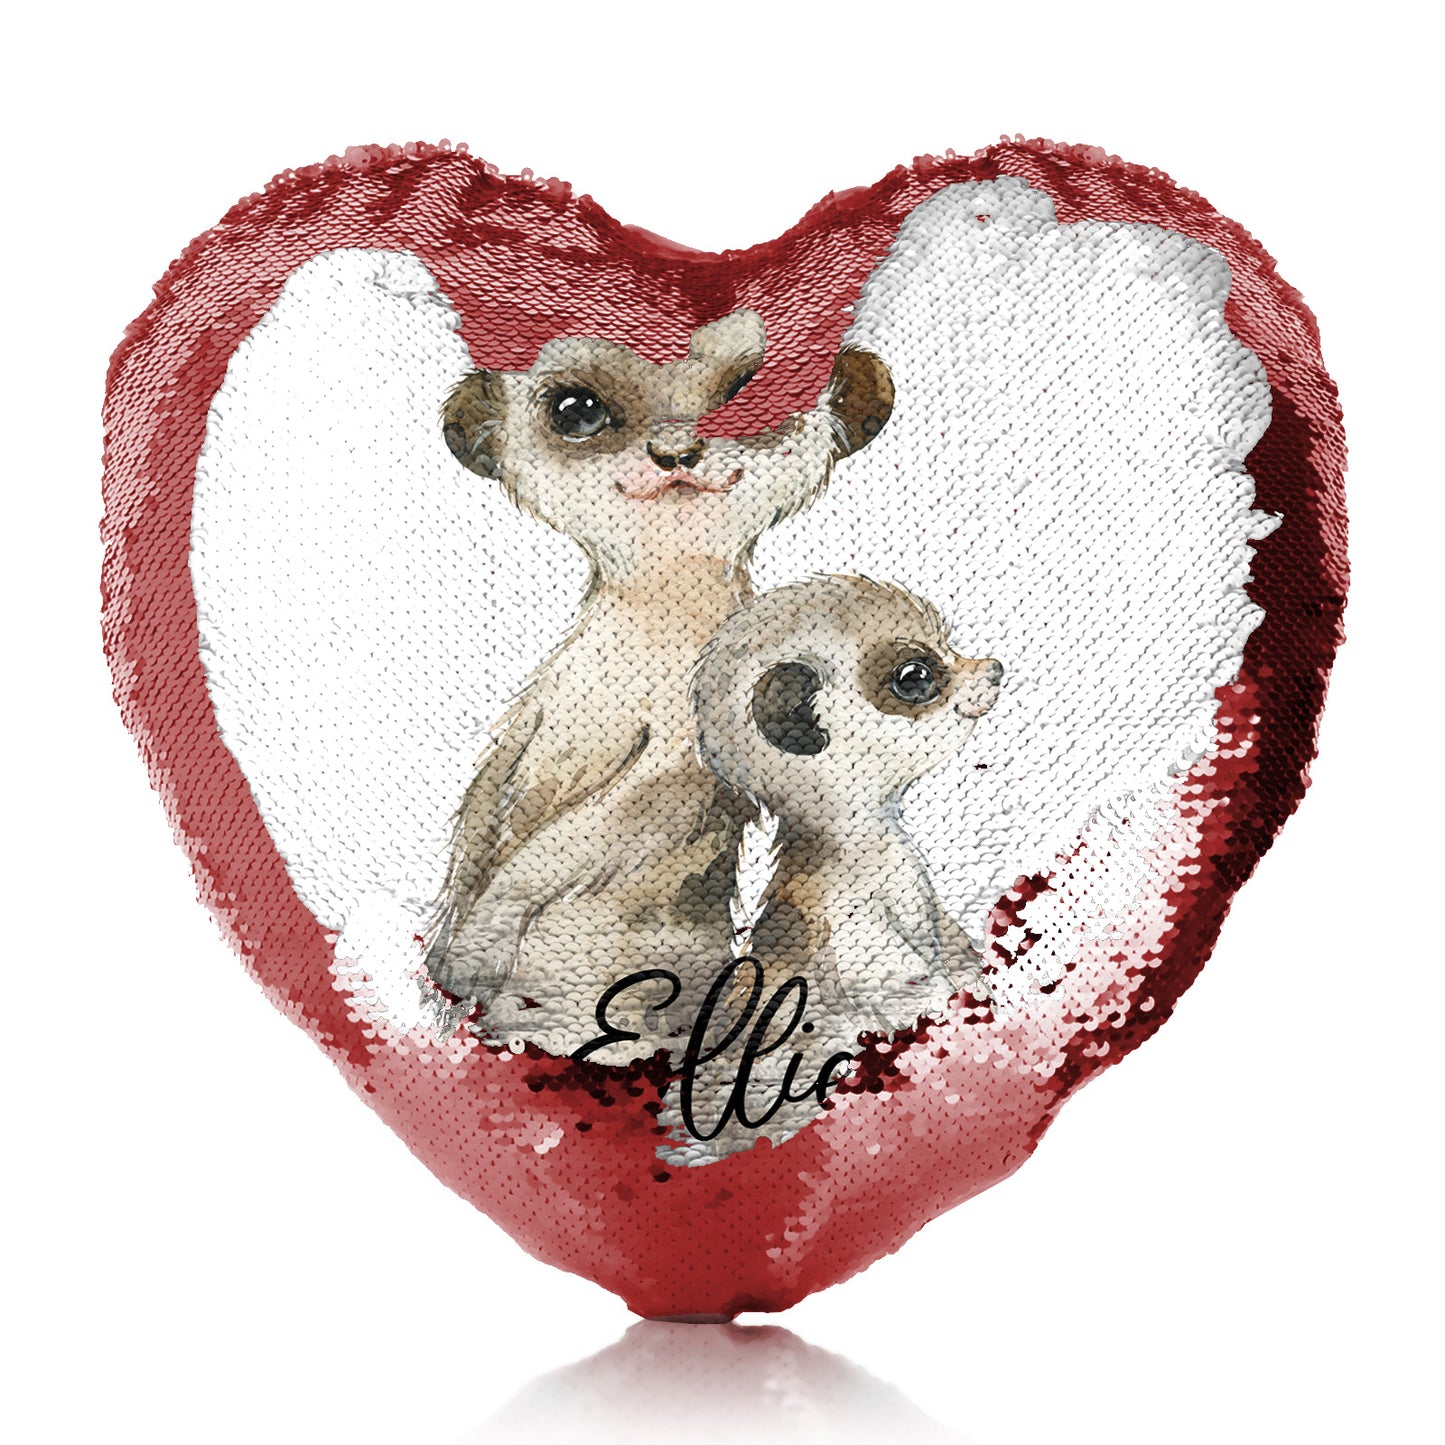 Personalised Sequin Heart Cushion with Meerkat Baby and Adult and Cute Text